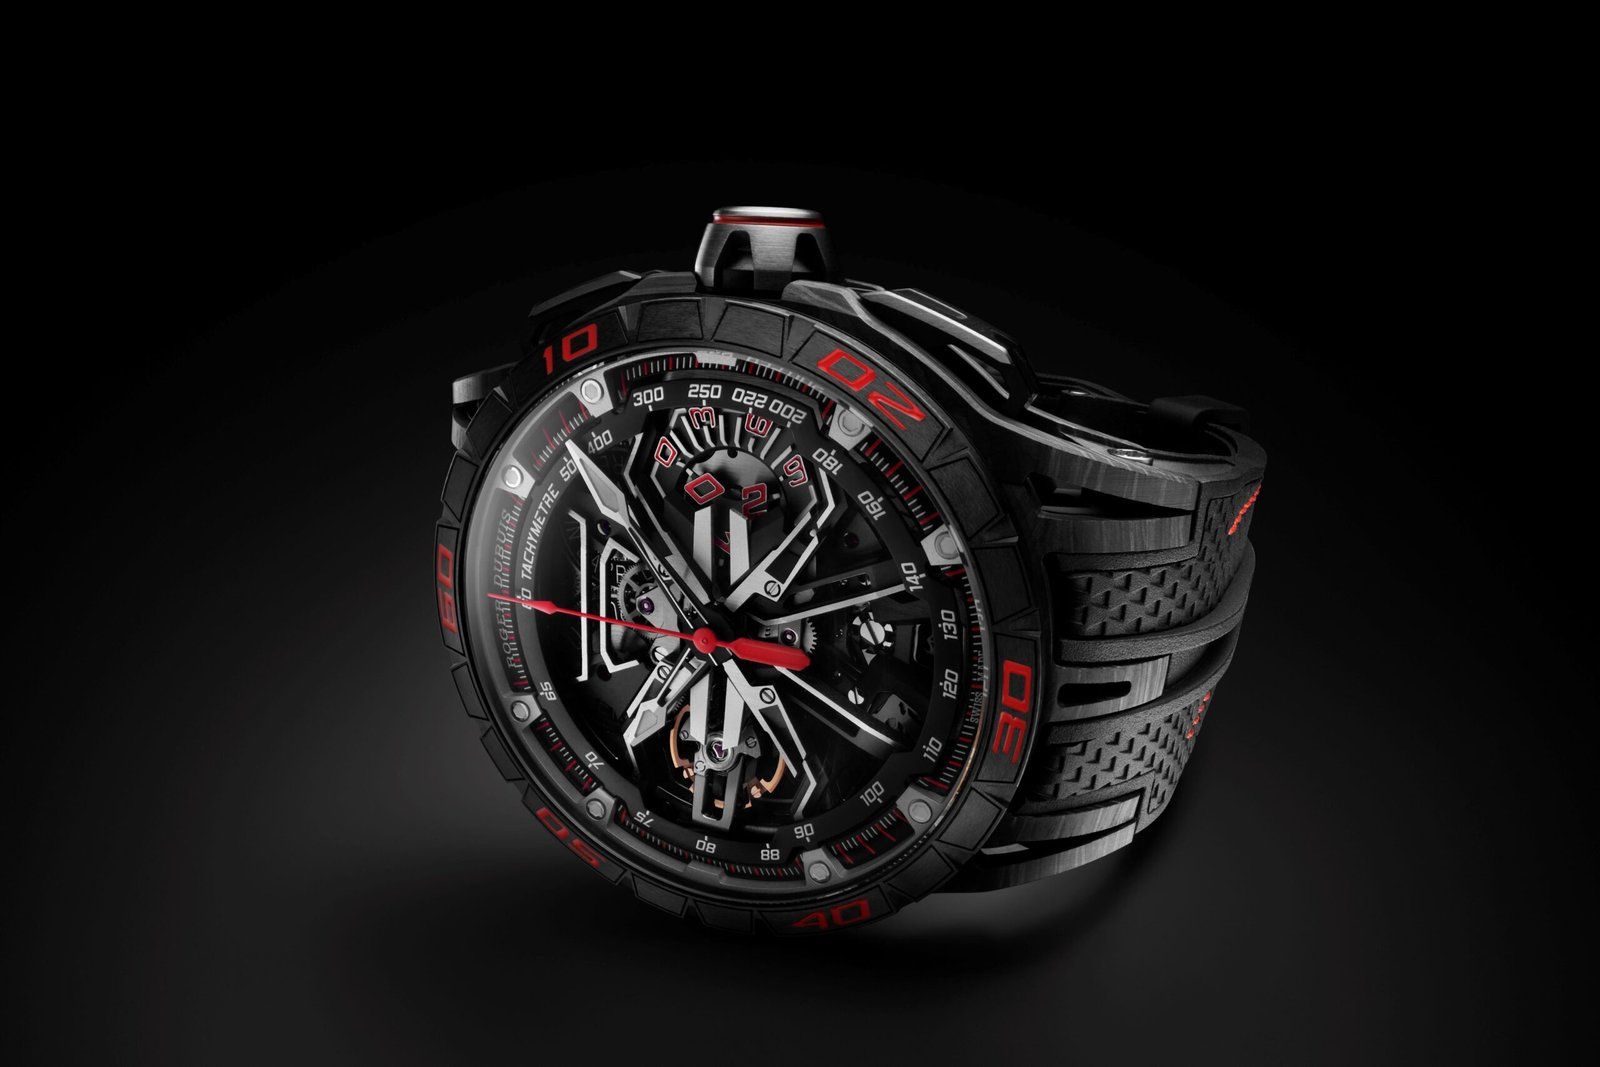 The Excalibur Spider Flyback Chronograph